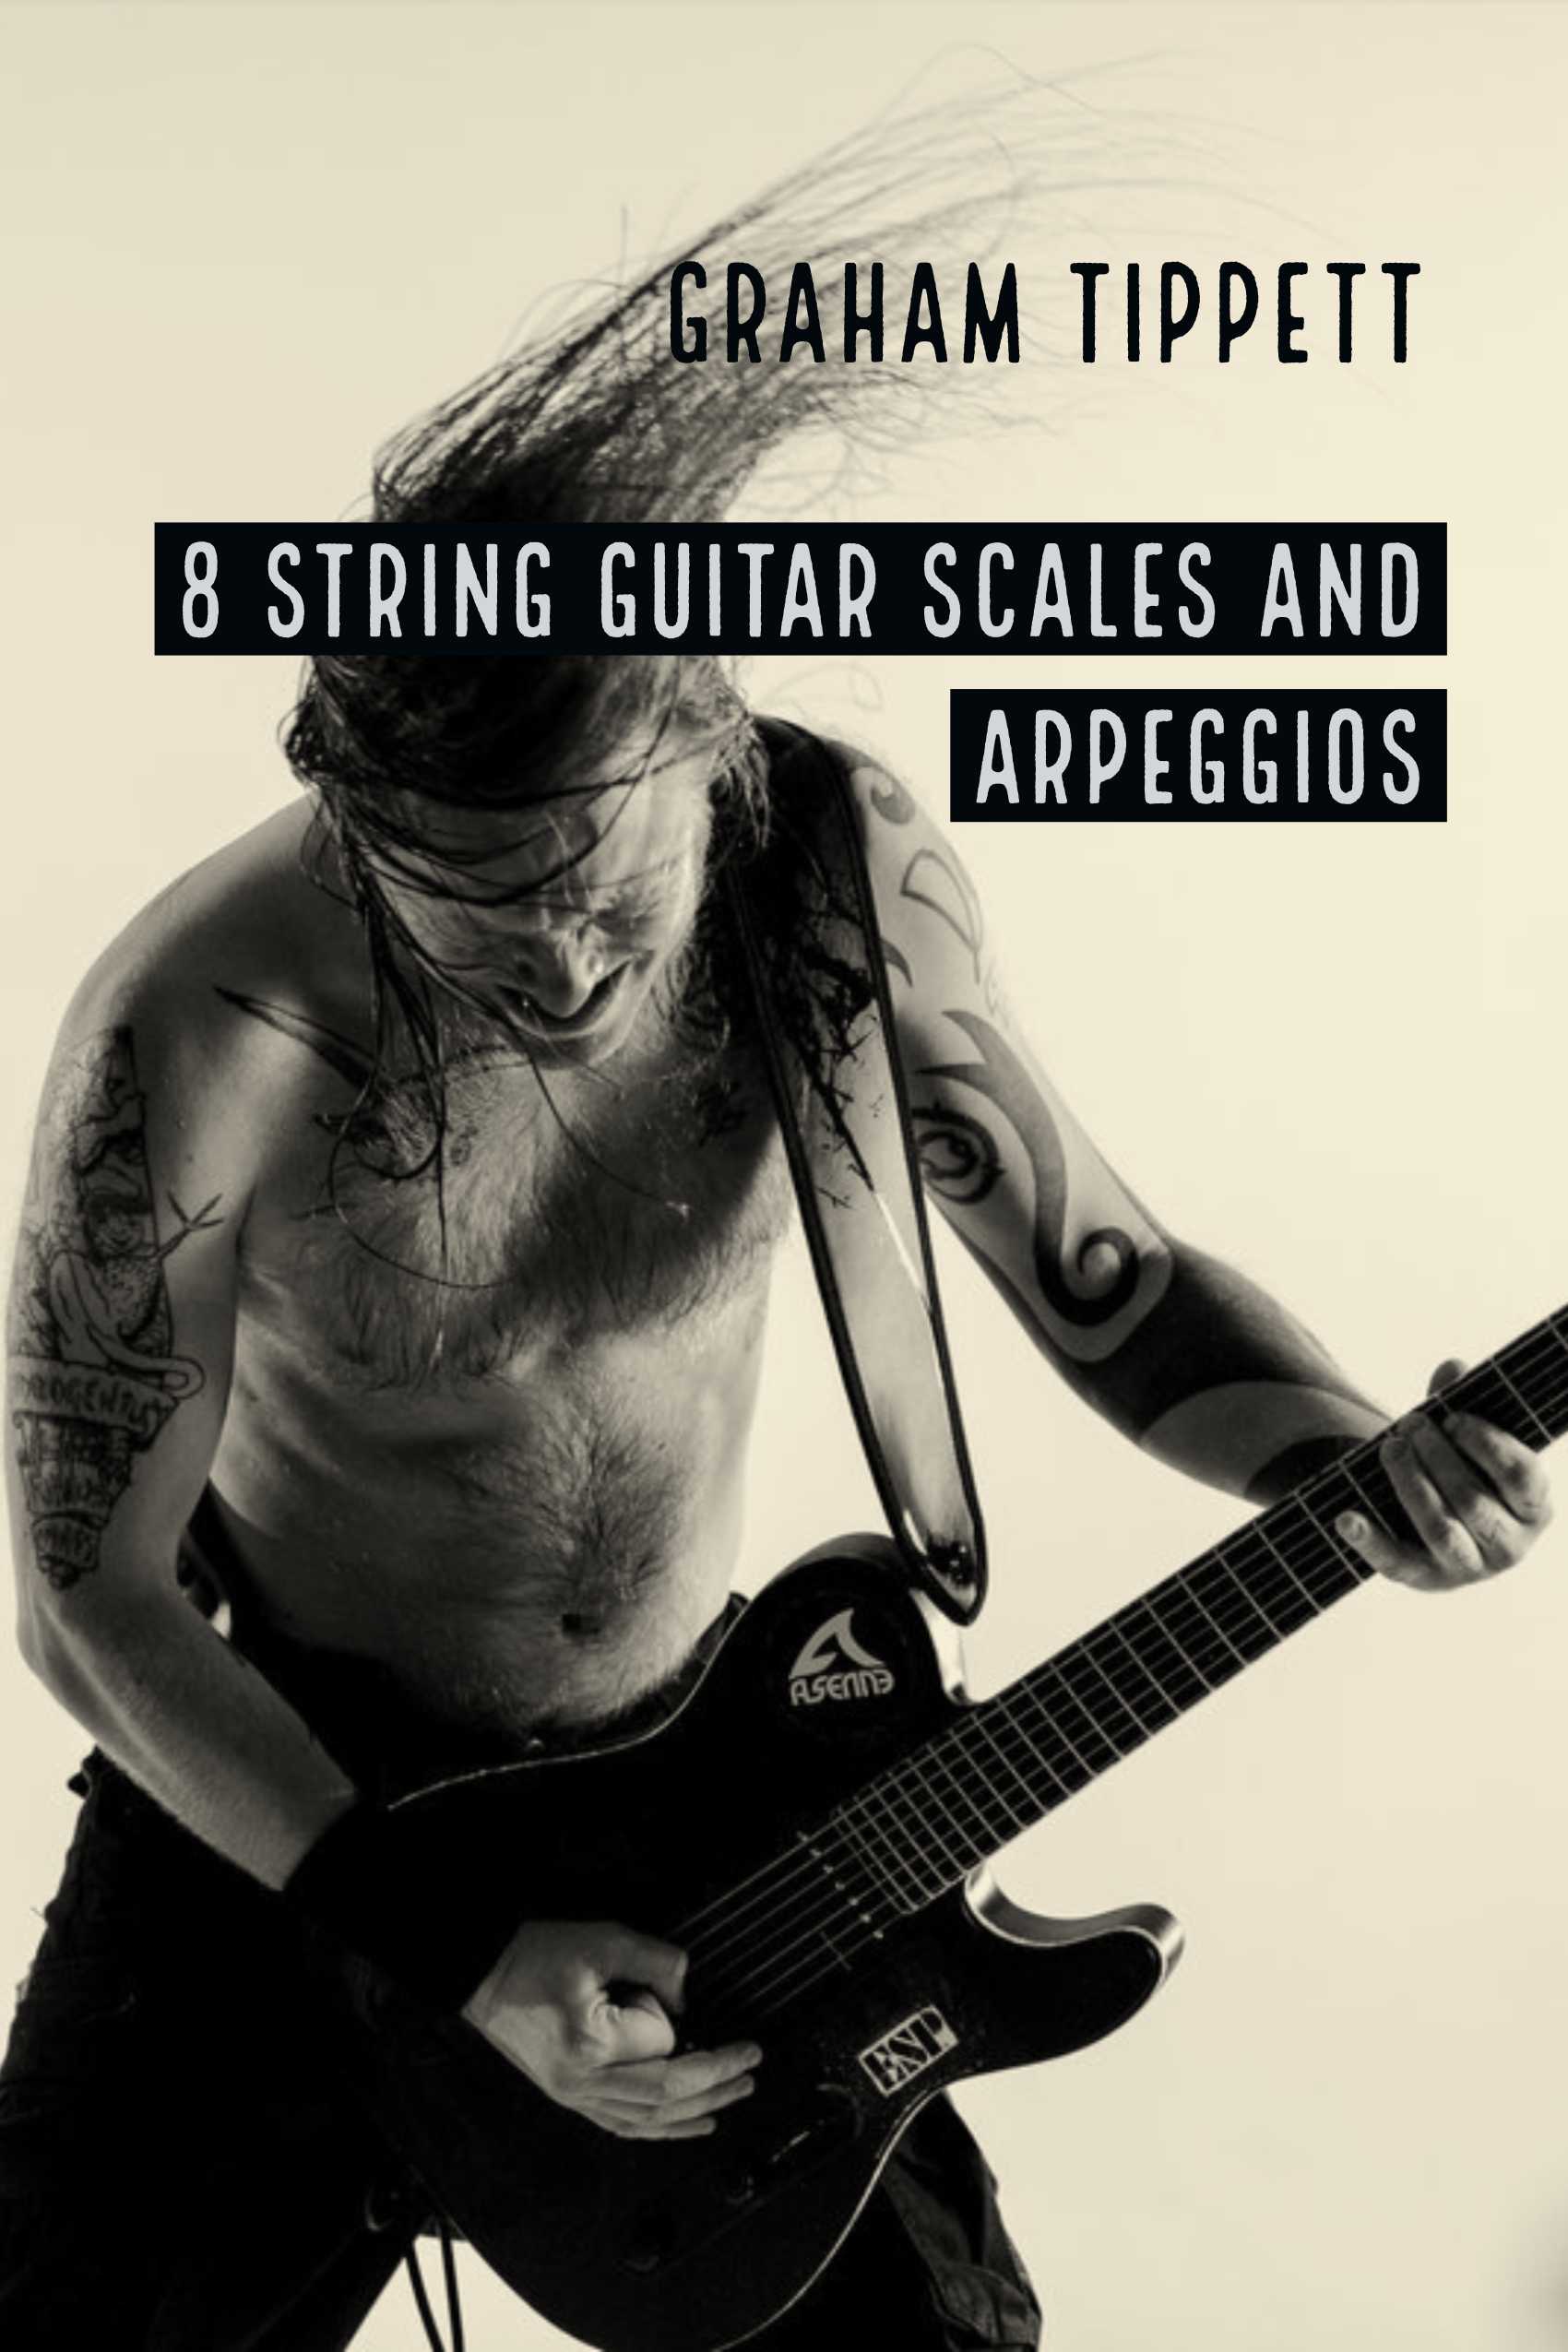 8 String Guitar Scales and Arpeggios